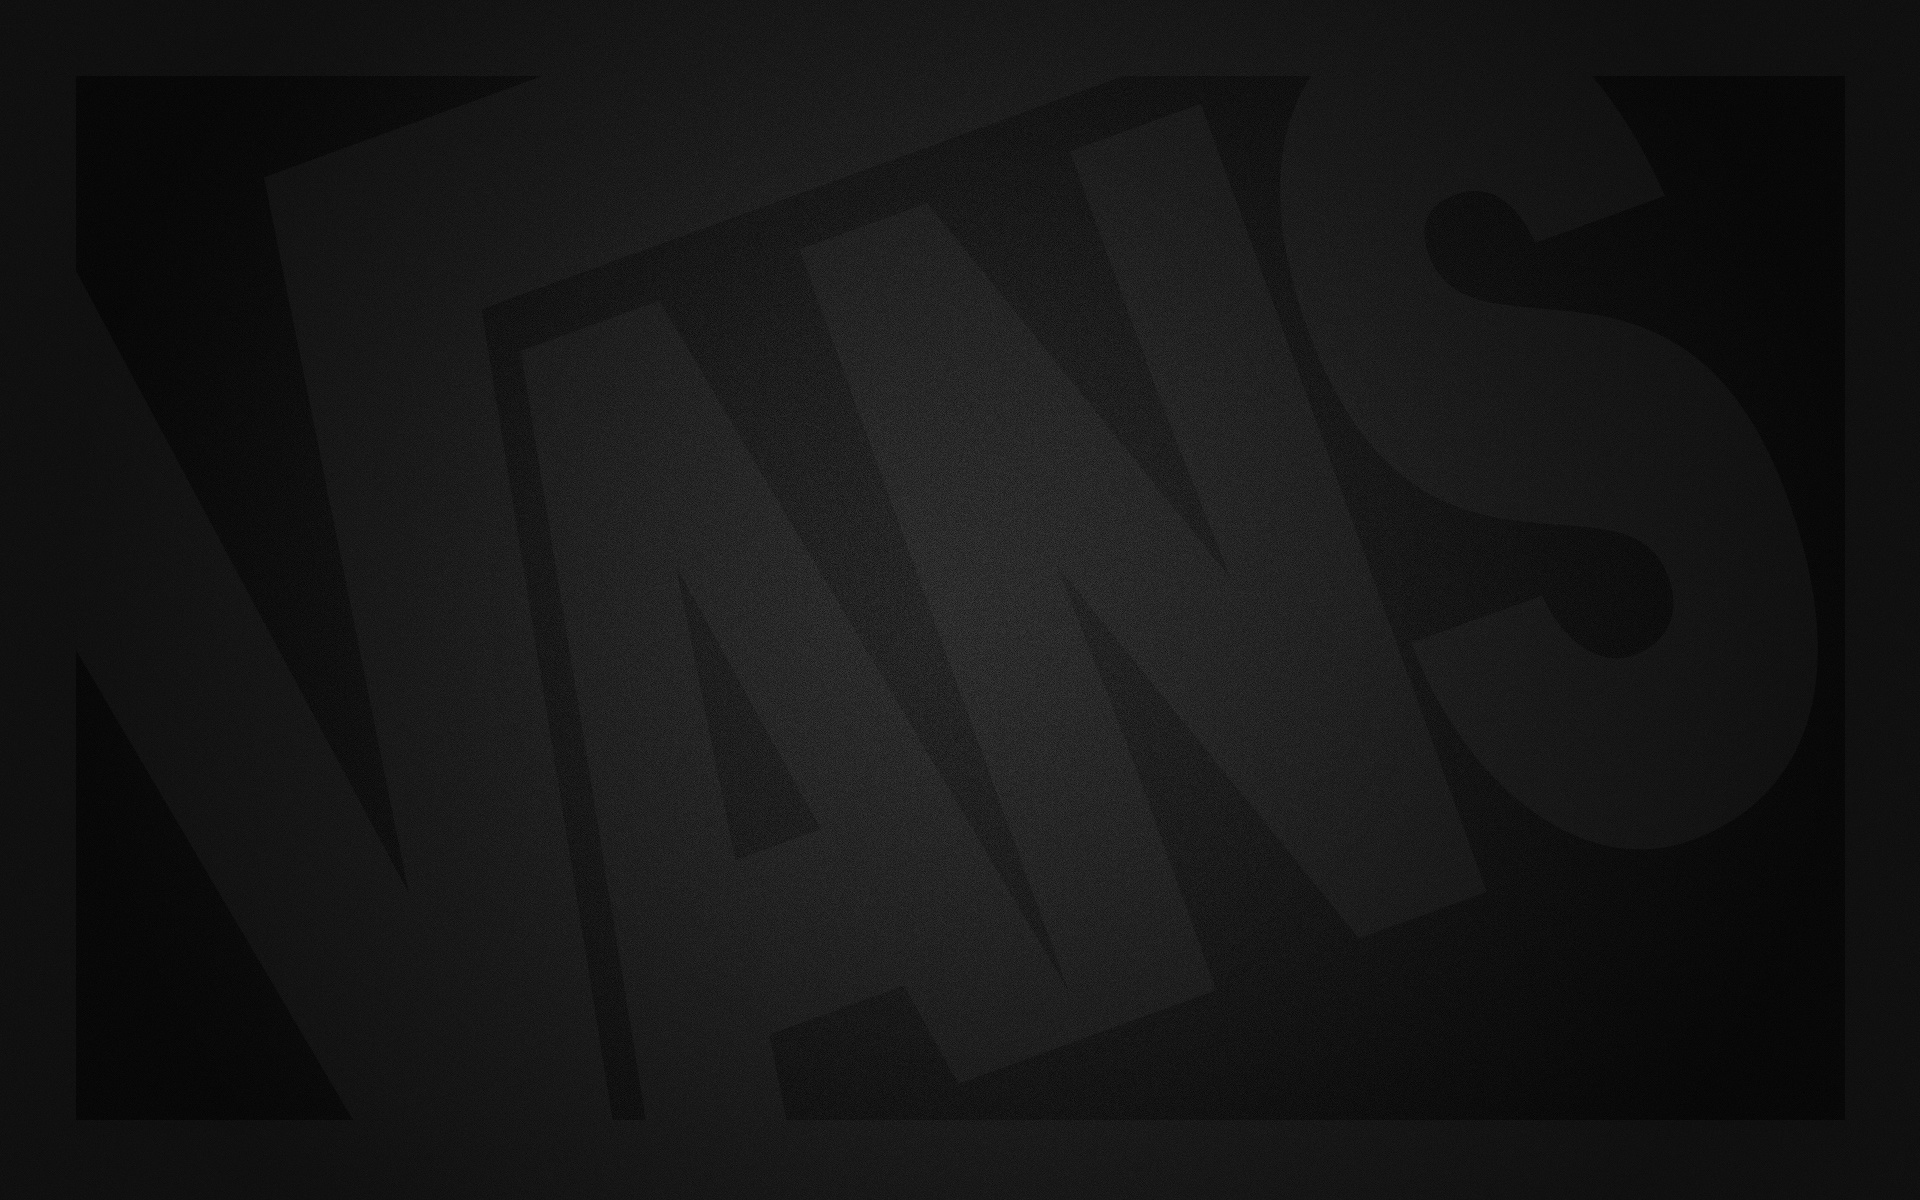 Vans: The main and title sponsor of the US Open of Surfing, Monochrome. 1920x1200 HD Wallpaper.